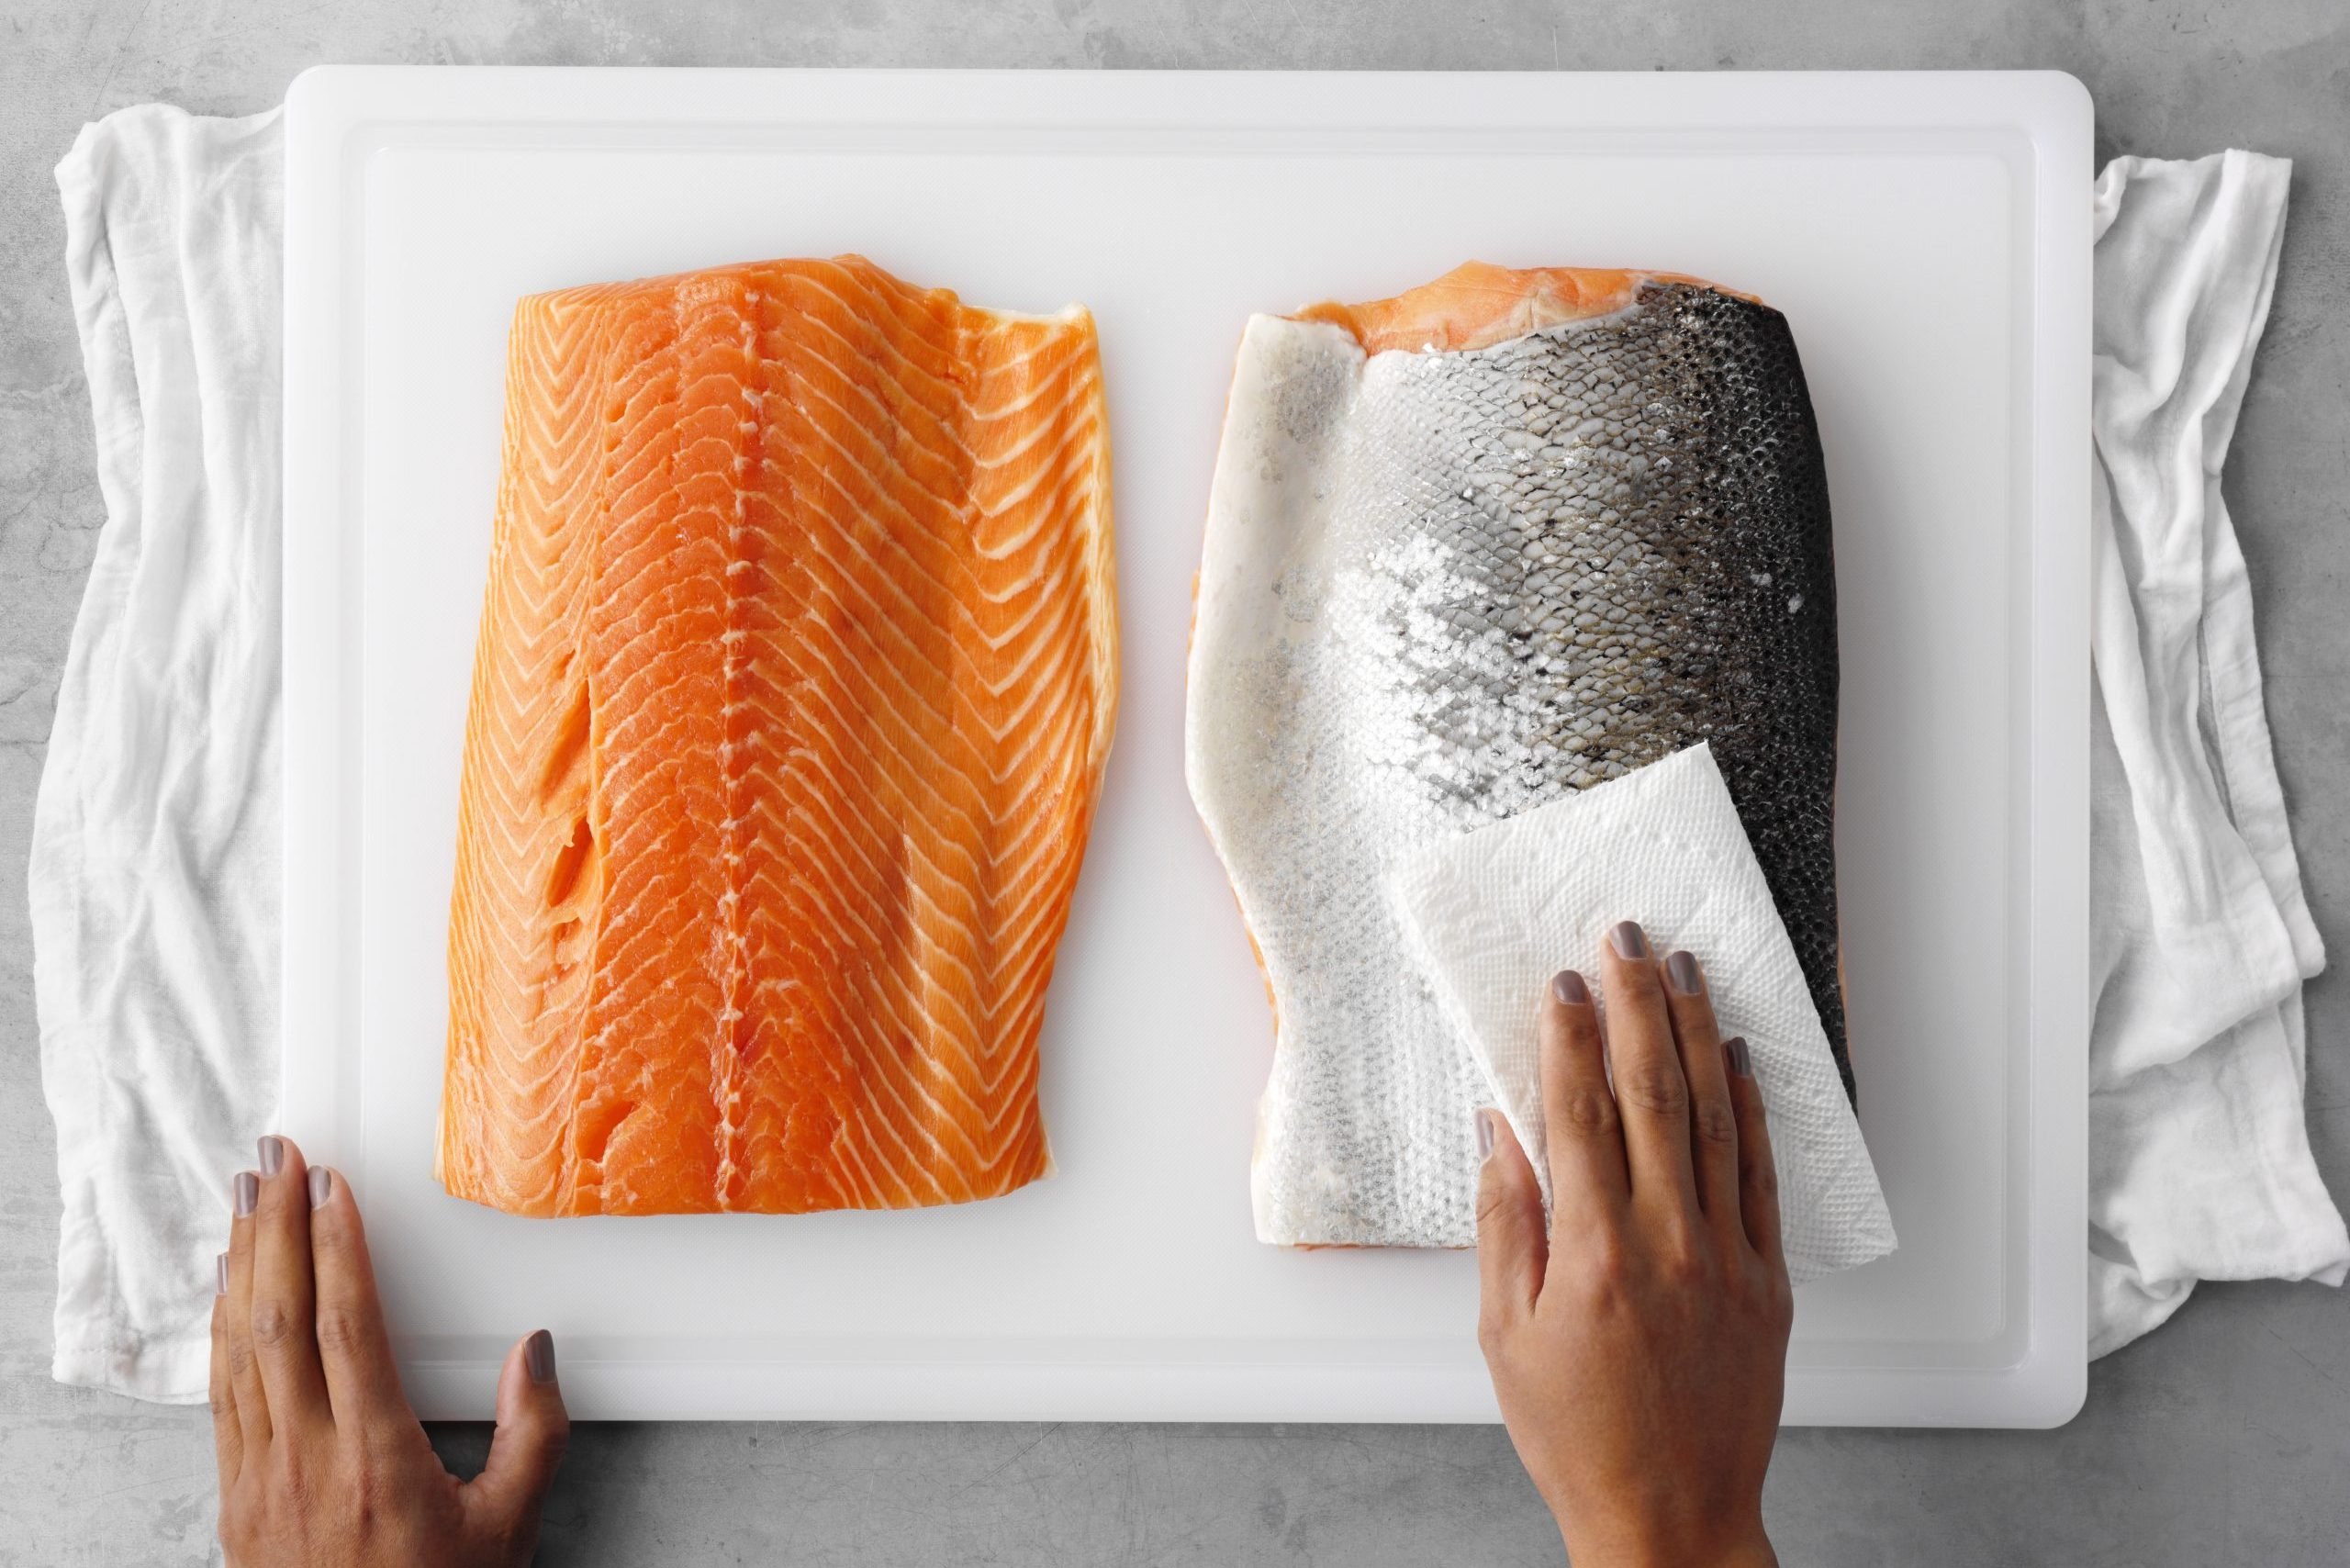 Overview of patting salmon dry